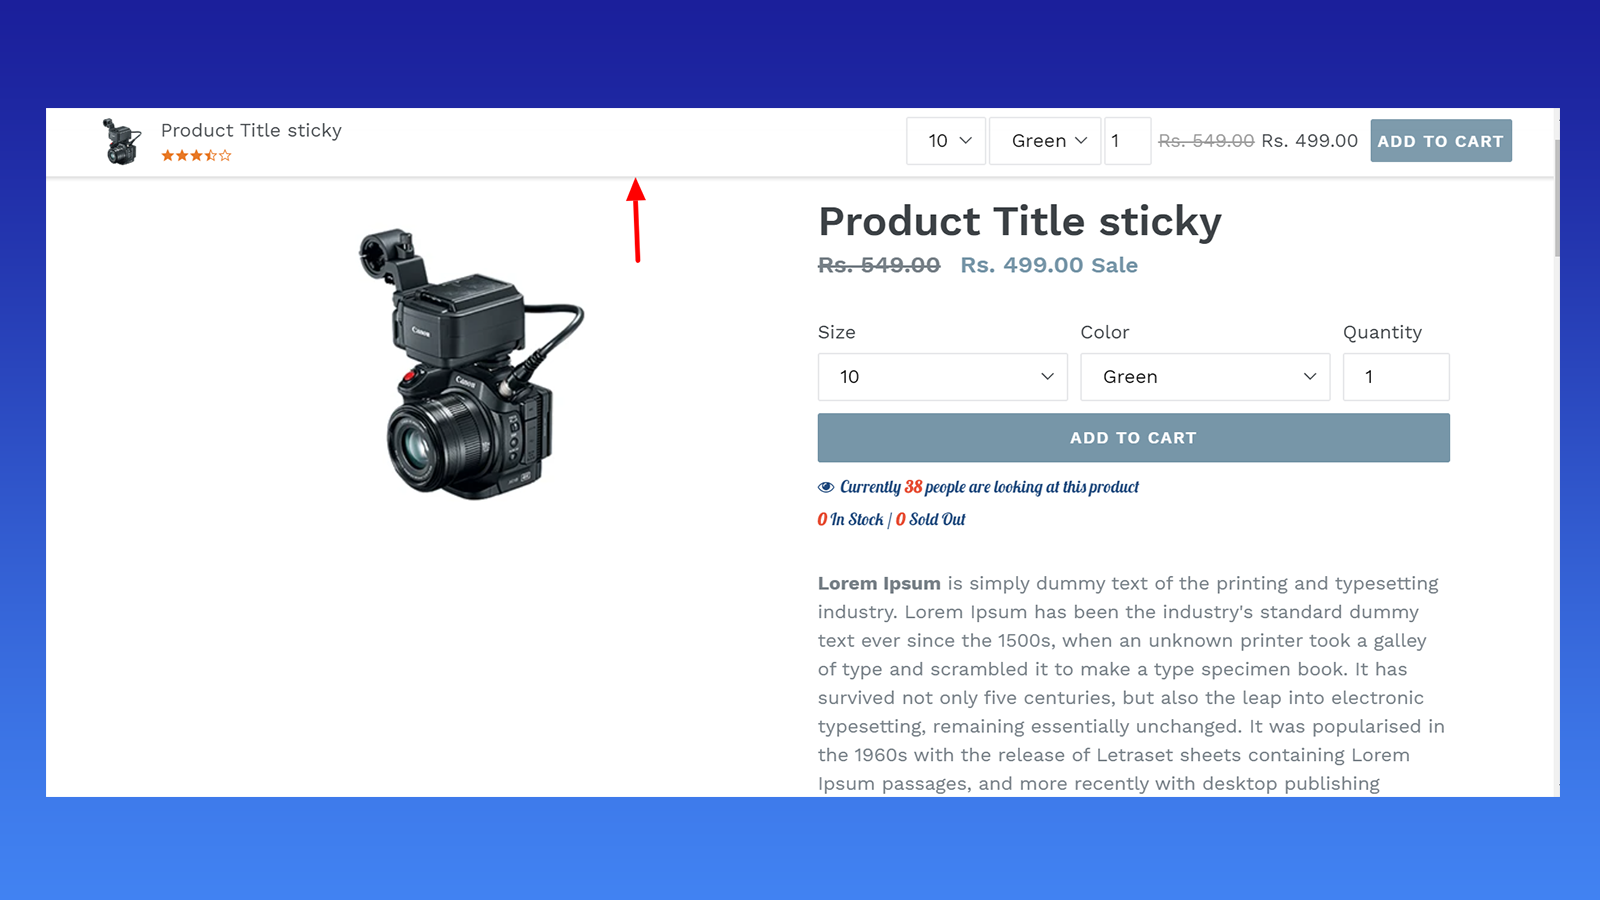 Sticky add to cart bar on top